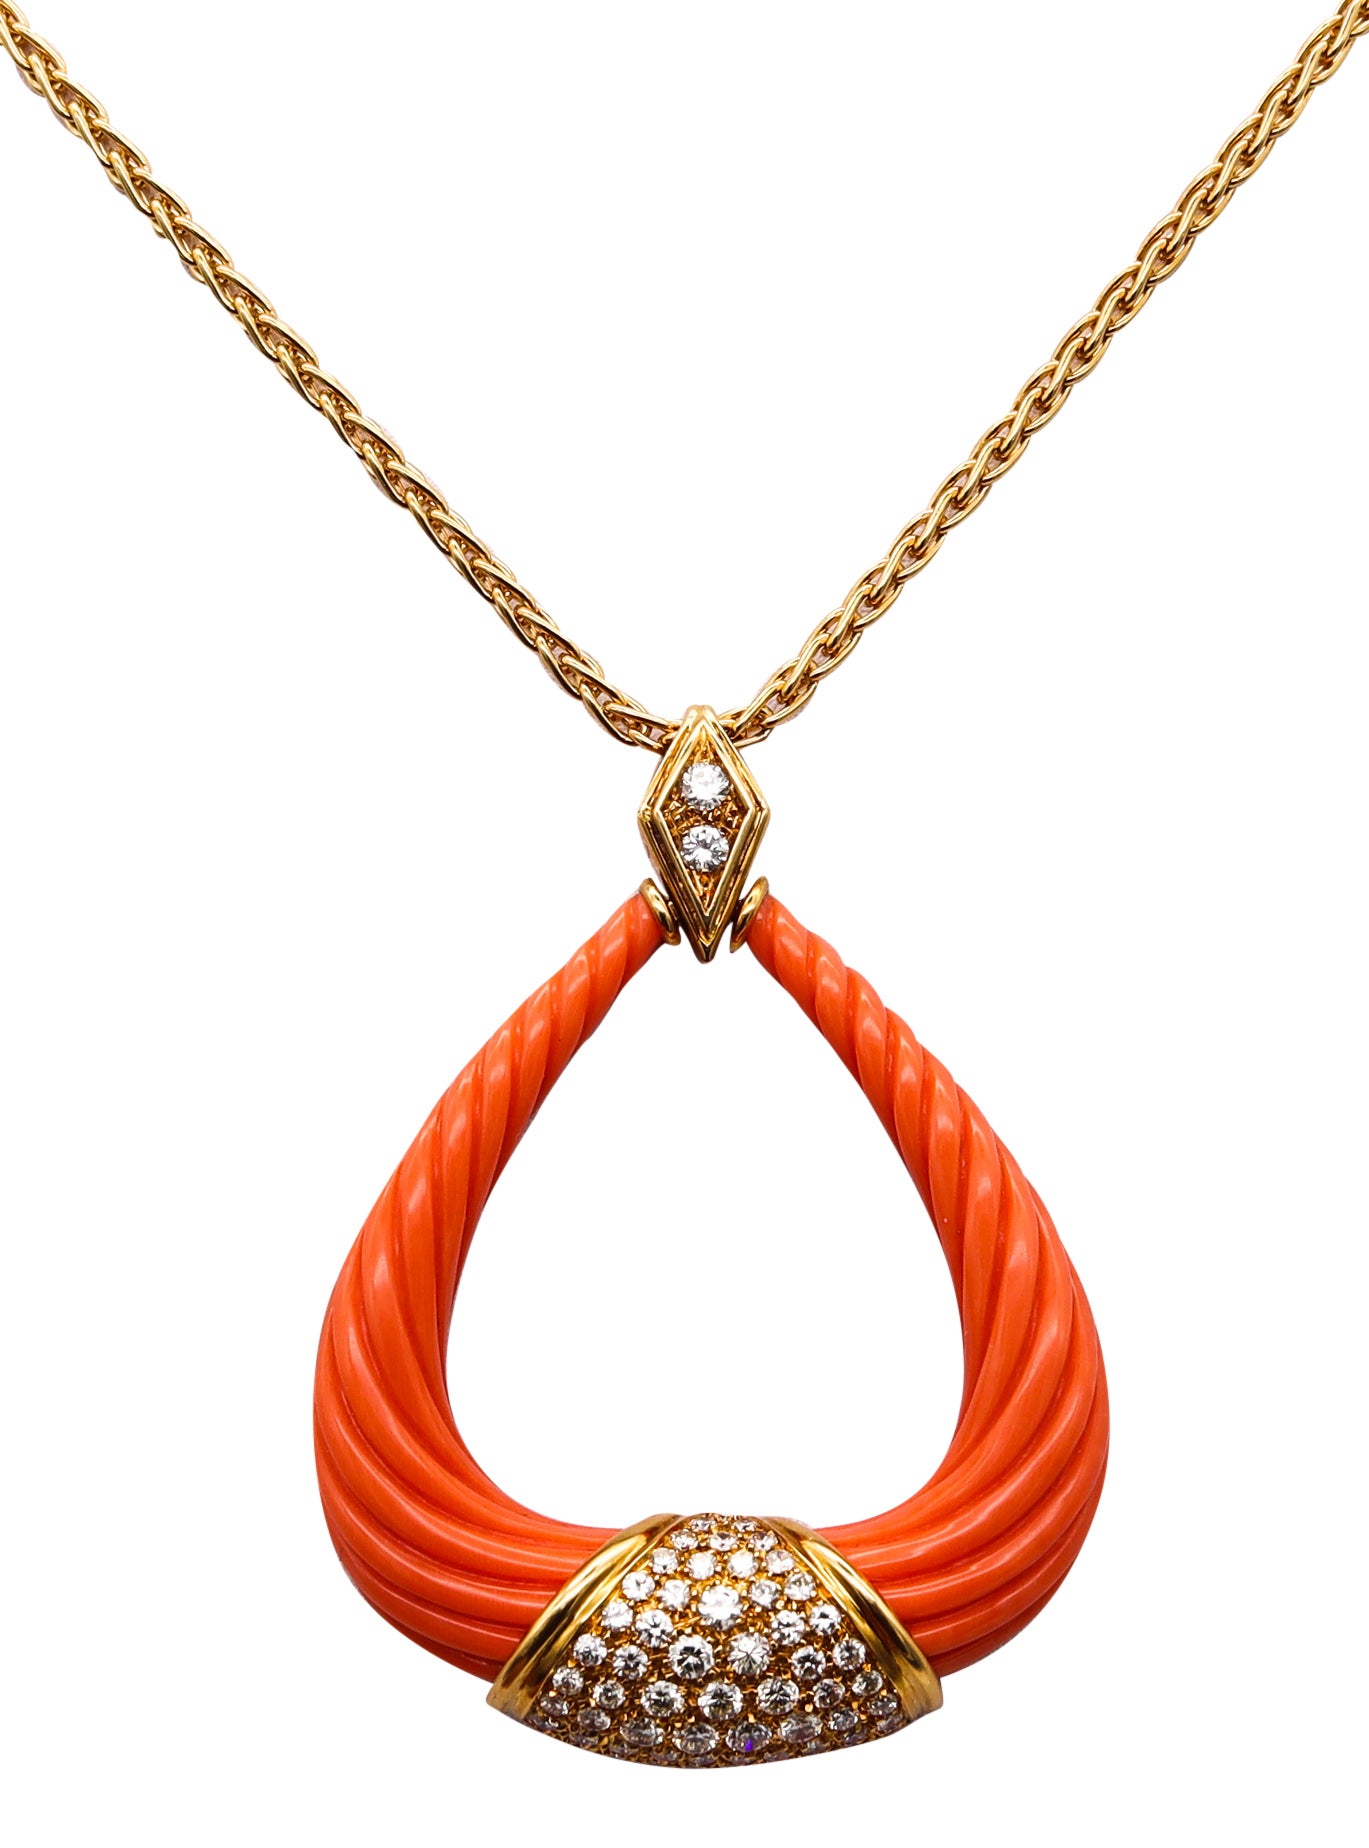 Vintage 1970 Fluted Coral Necklace Pendant In 18Kt Yellow Gold With 3.12 Cts In VVS Diamonds